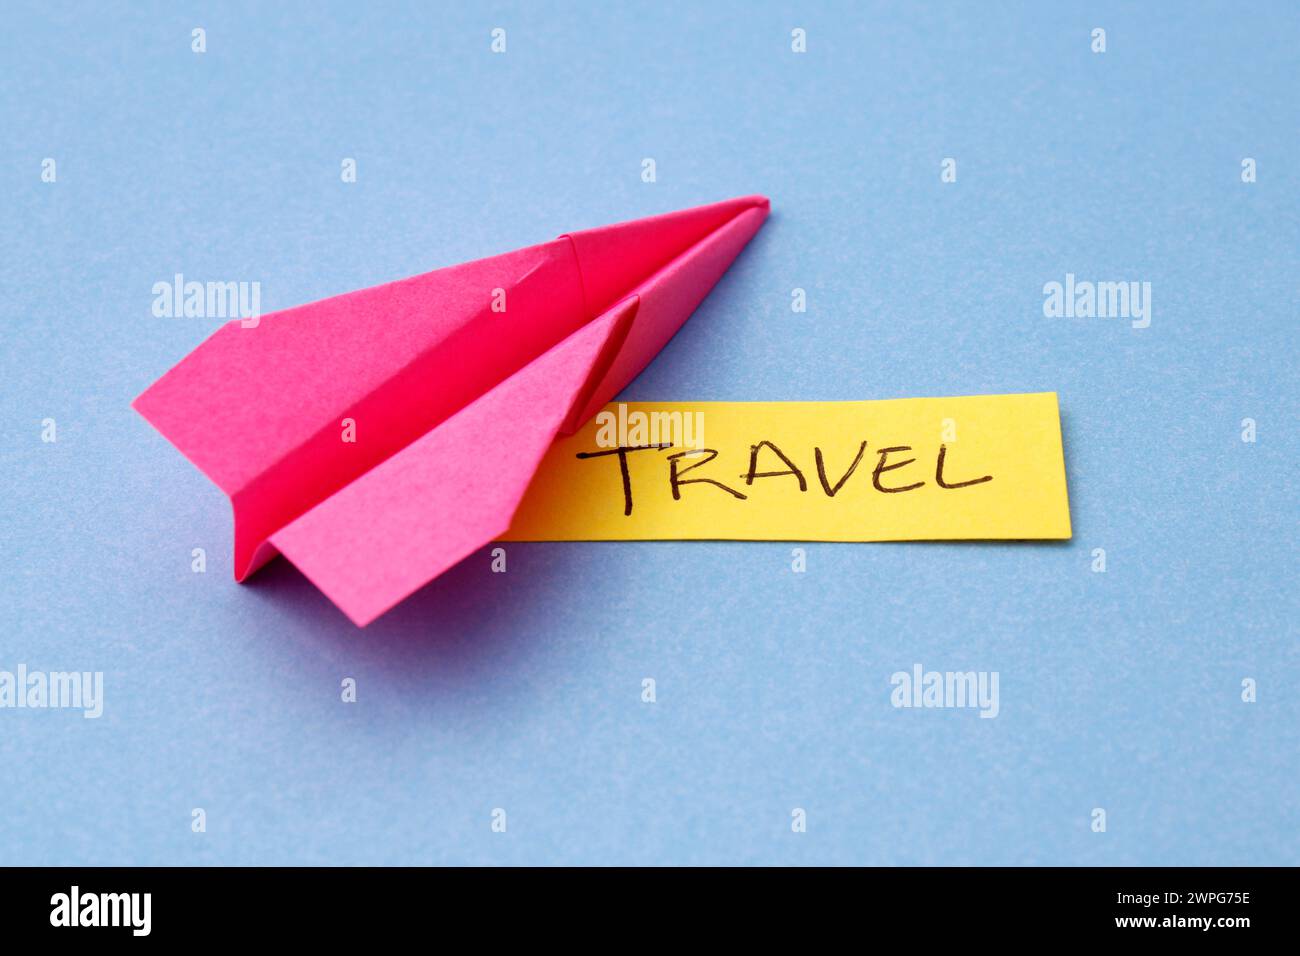 Planning a vacation trip by airplane Stock Photo